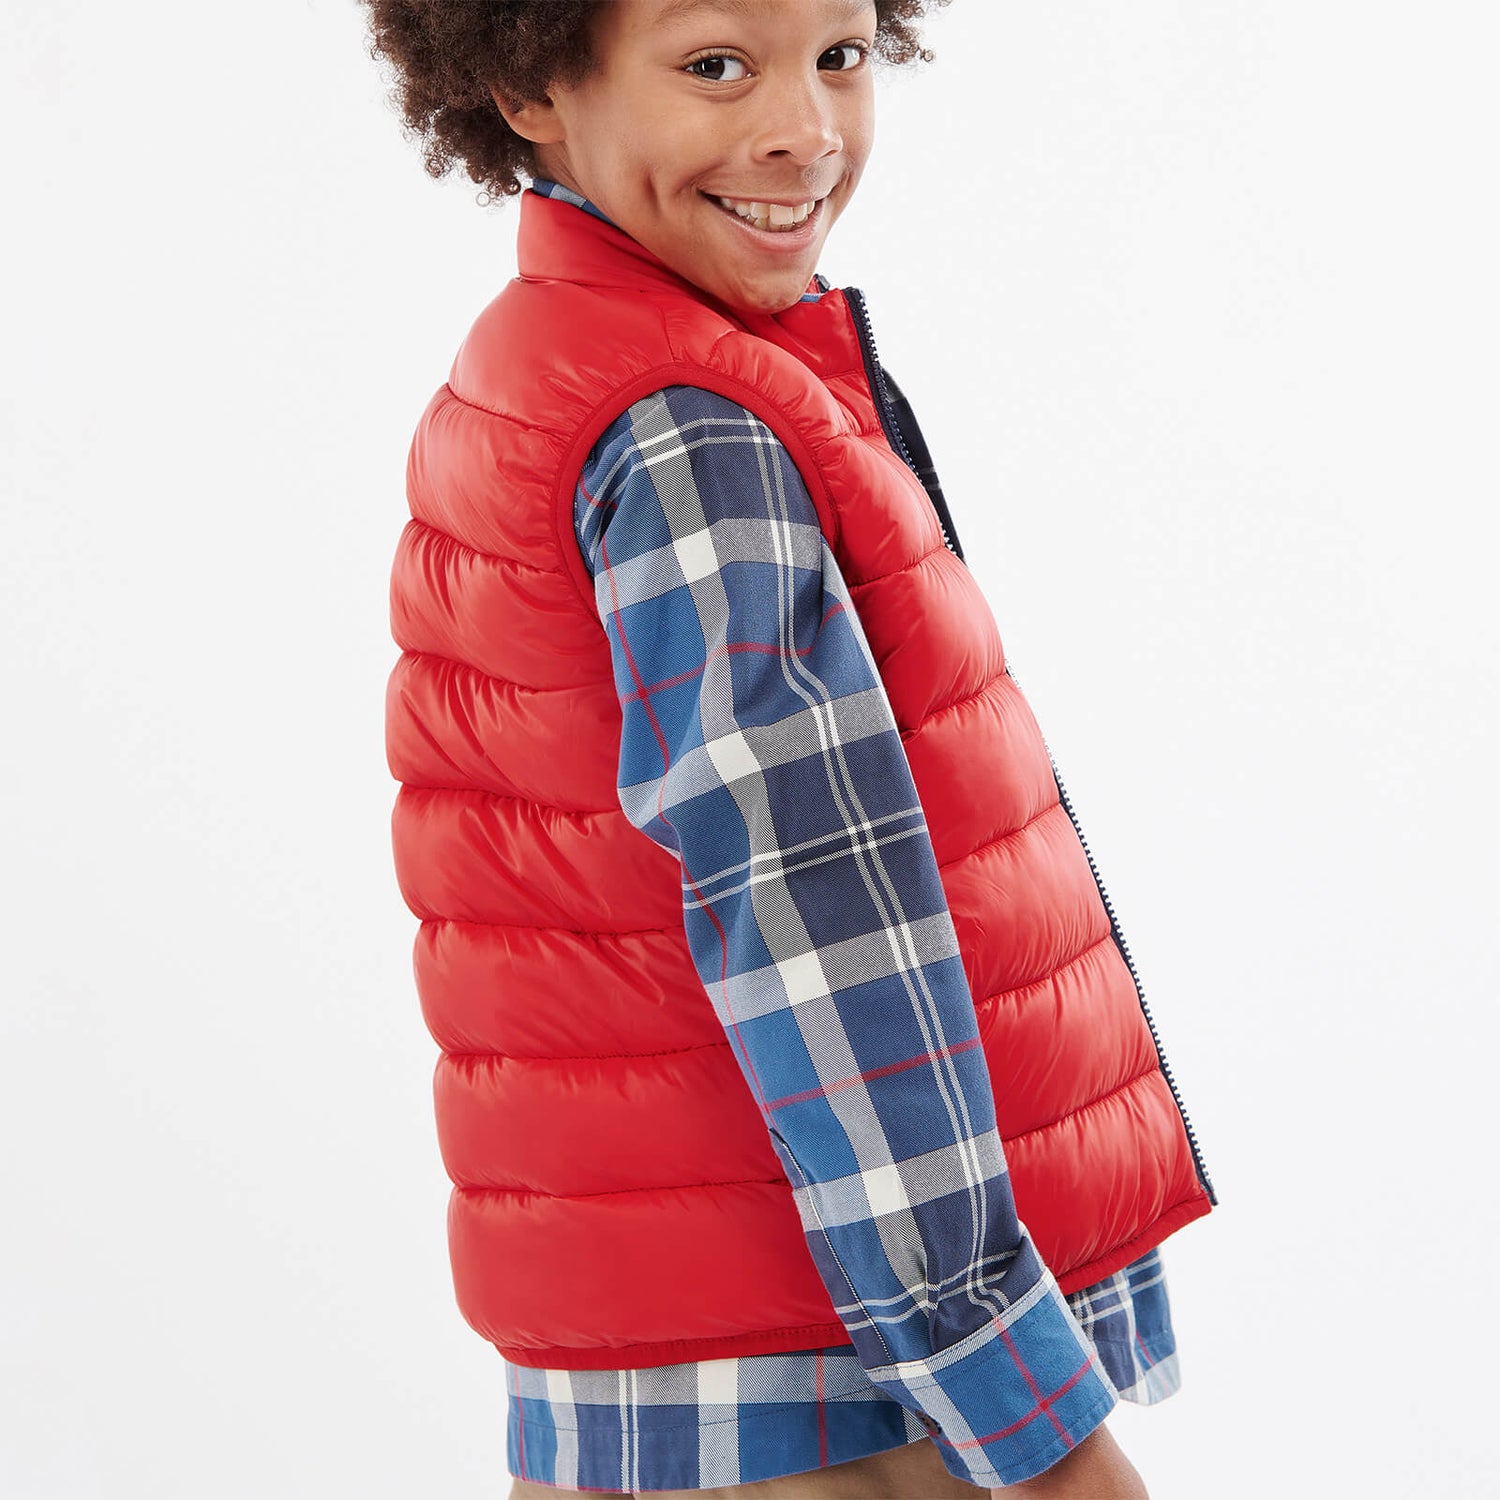 Barbour Boys' Fromar Trawl Gilet - Red -  12-13 Years